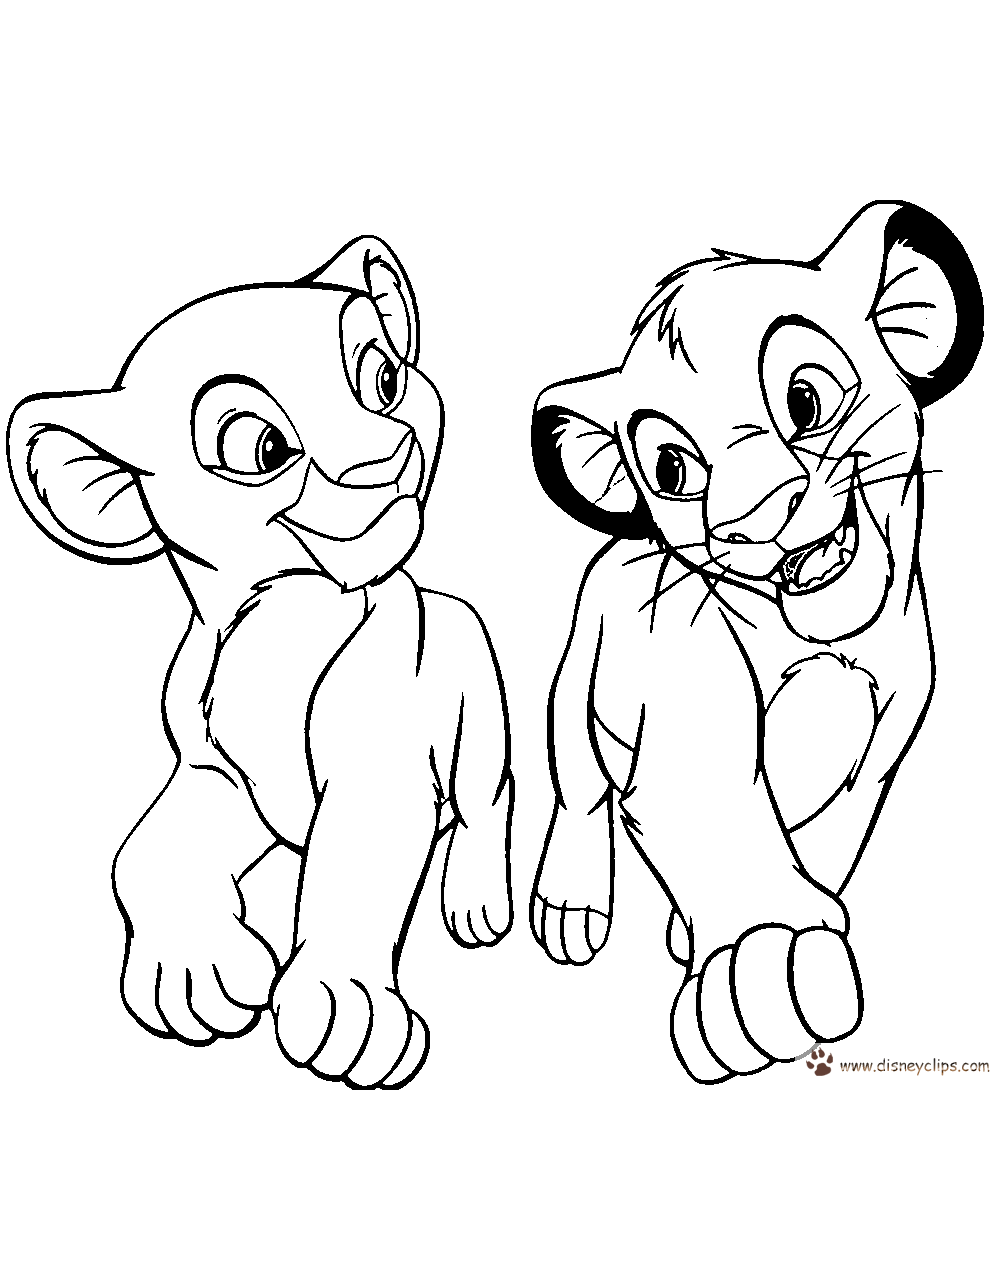 free colouring pages lion king lion king coloring pages coloring pages to print lion colouring pages king free 